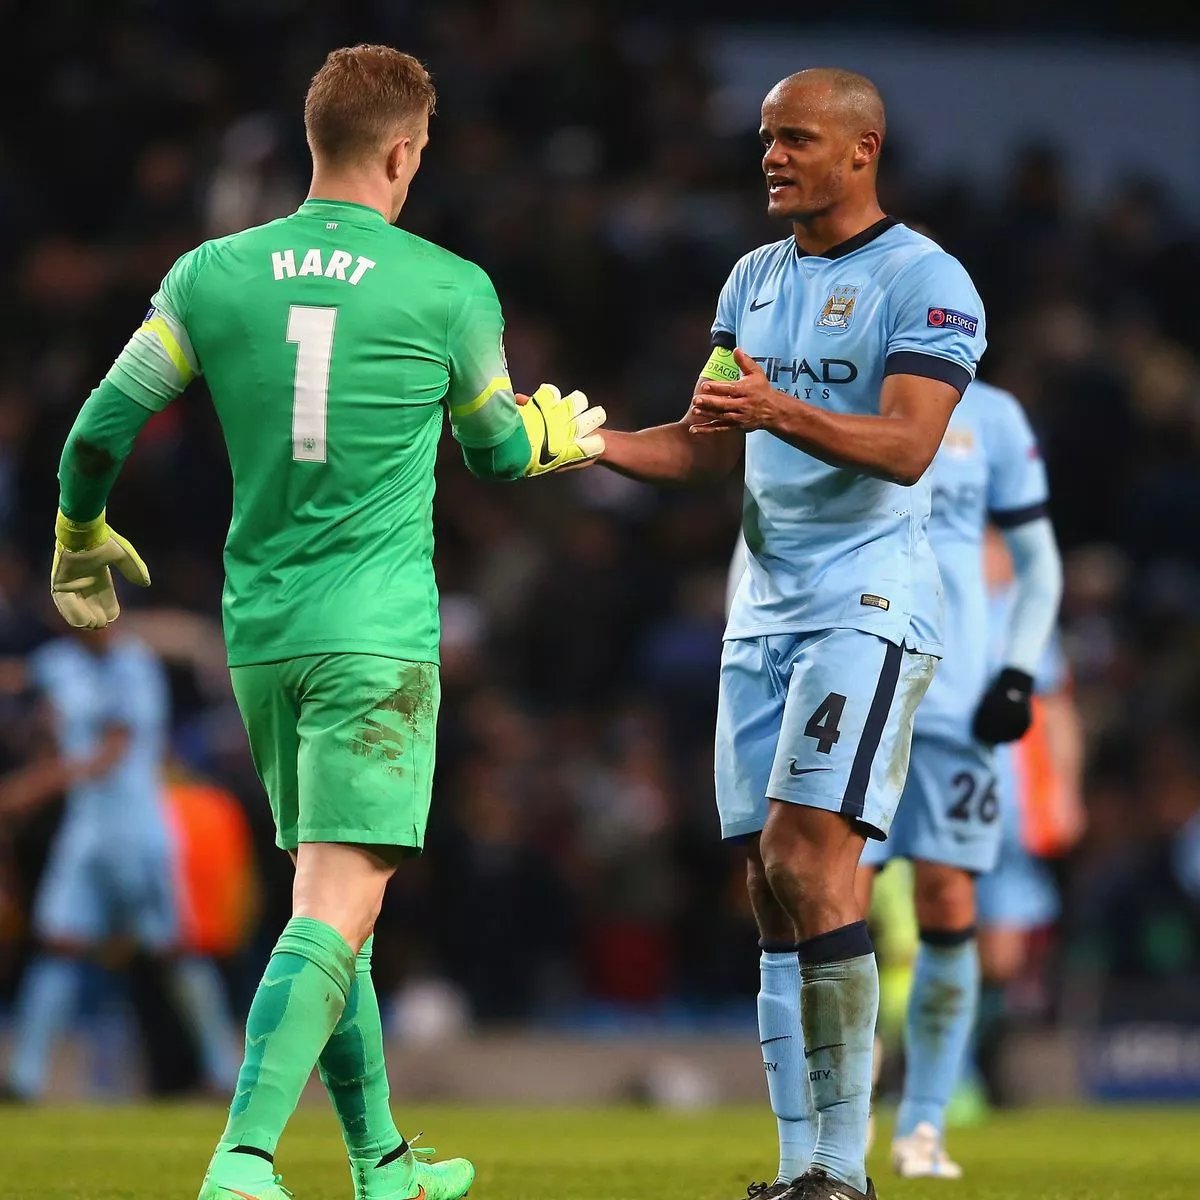 Vincent Kompany on Joe Hart 🗣️ 

'I don’t think people remember how big it was in those first two titles we had, and in those first years where #ManCity were doing well. He was unbelievable - he was unlucky that the game changed, right at the moment he was going into his prime.'